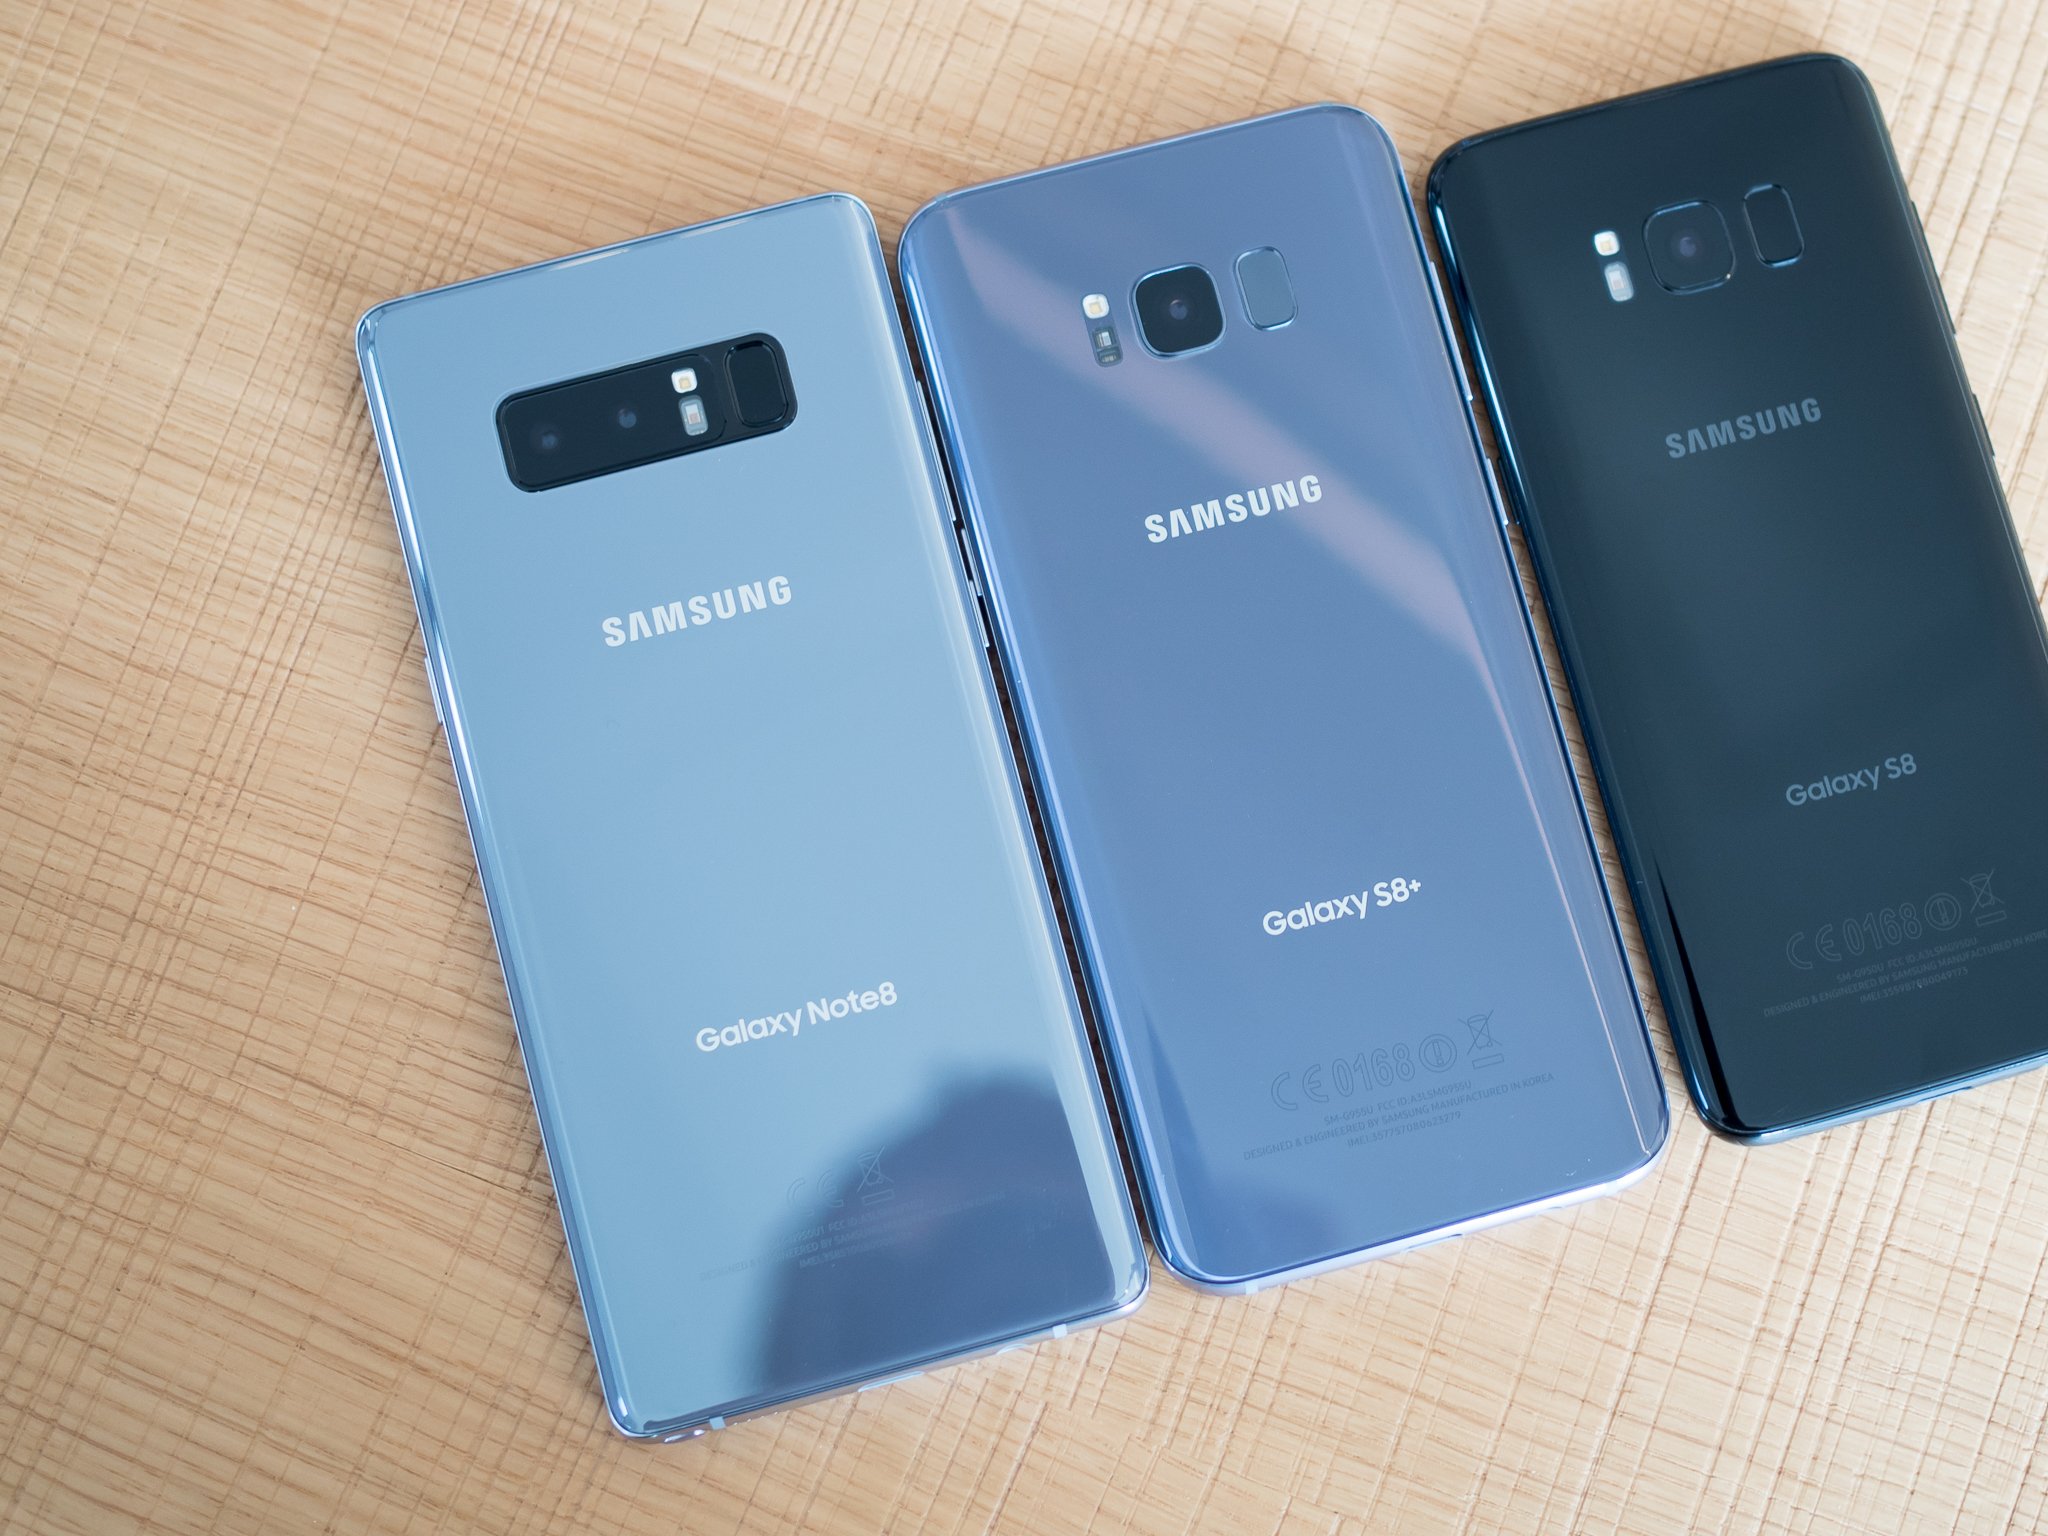 Galaxy Note 8 Vs Galaxy S8 Which Should You Buy Android Central